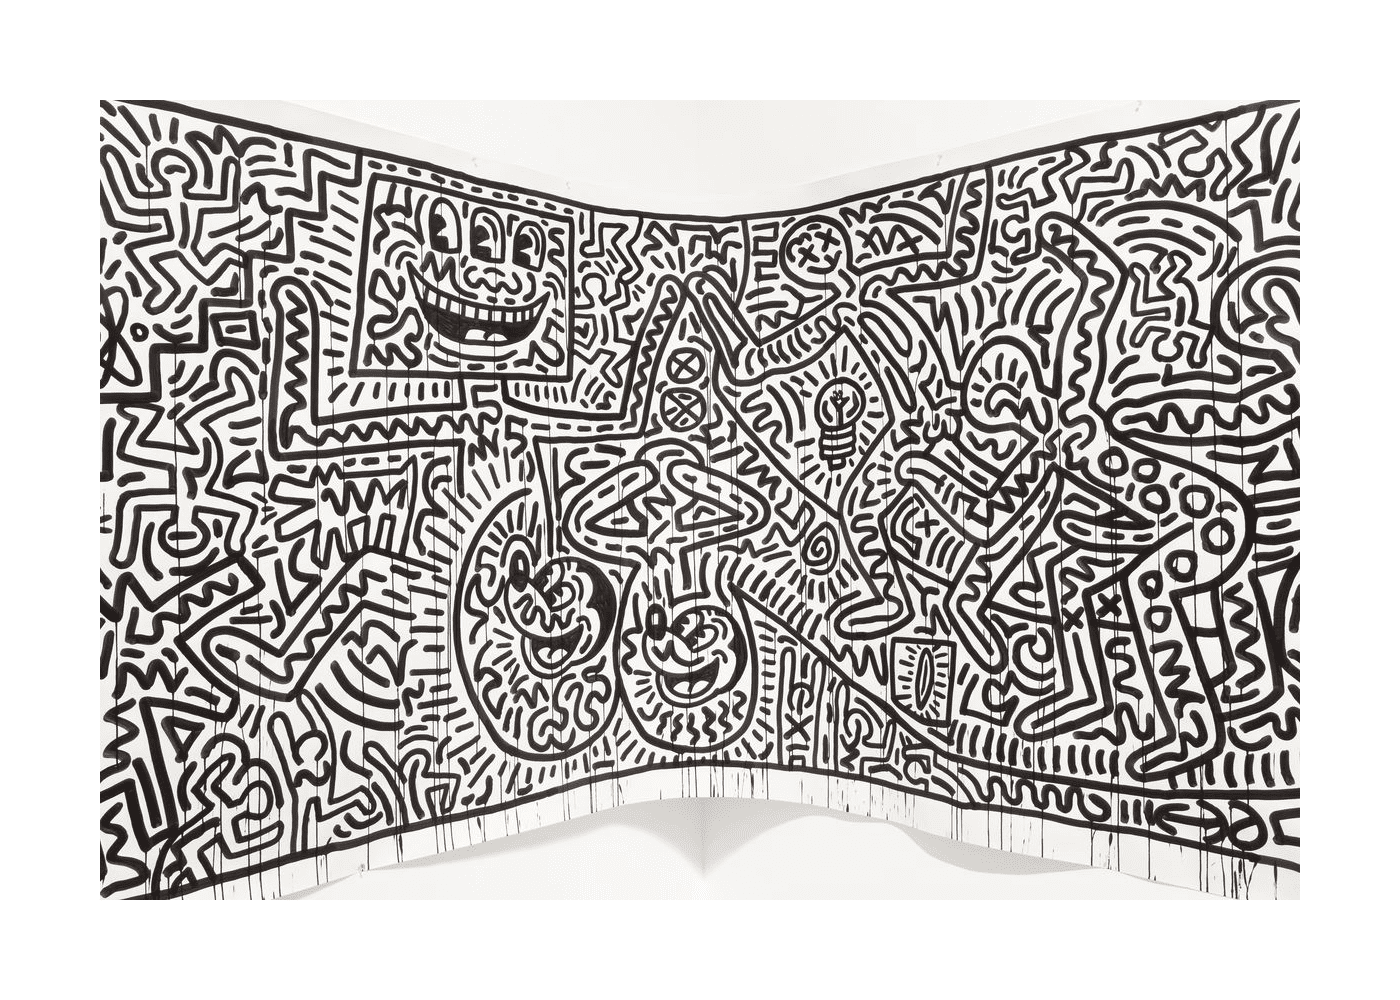  a fresco by Keith Haring 